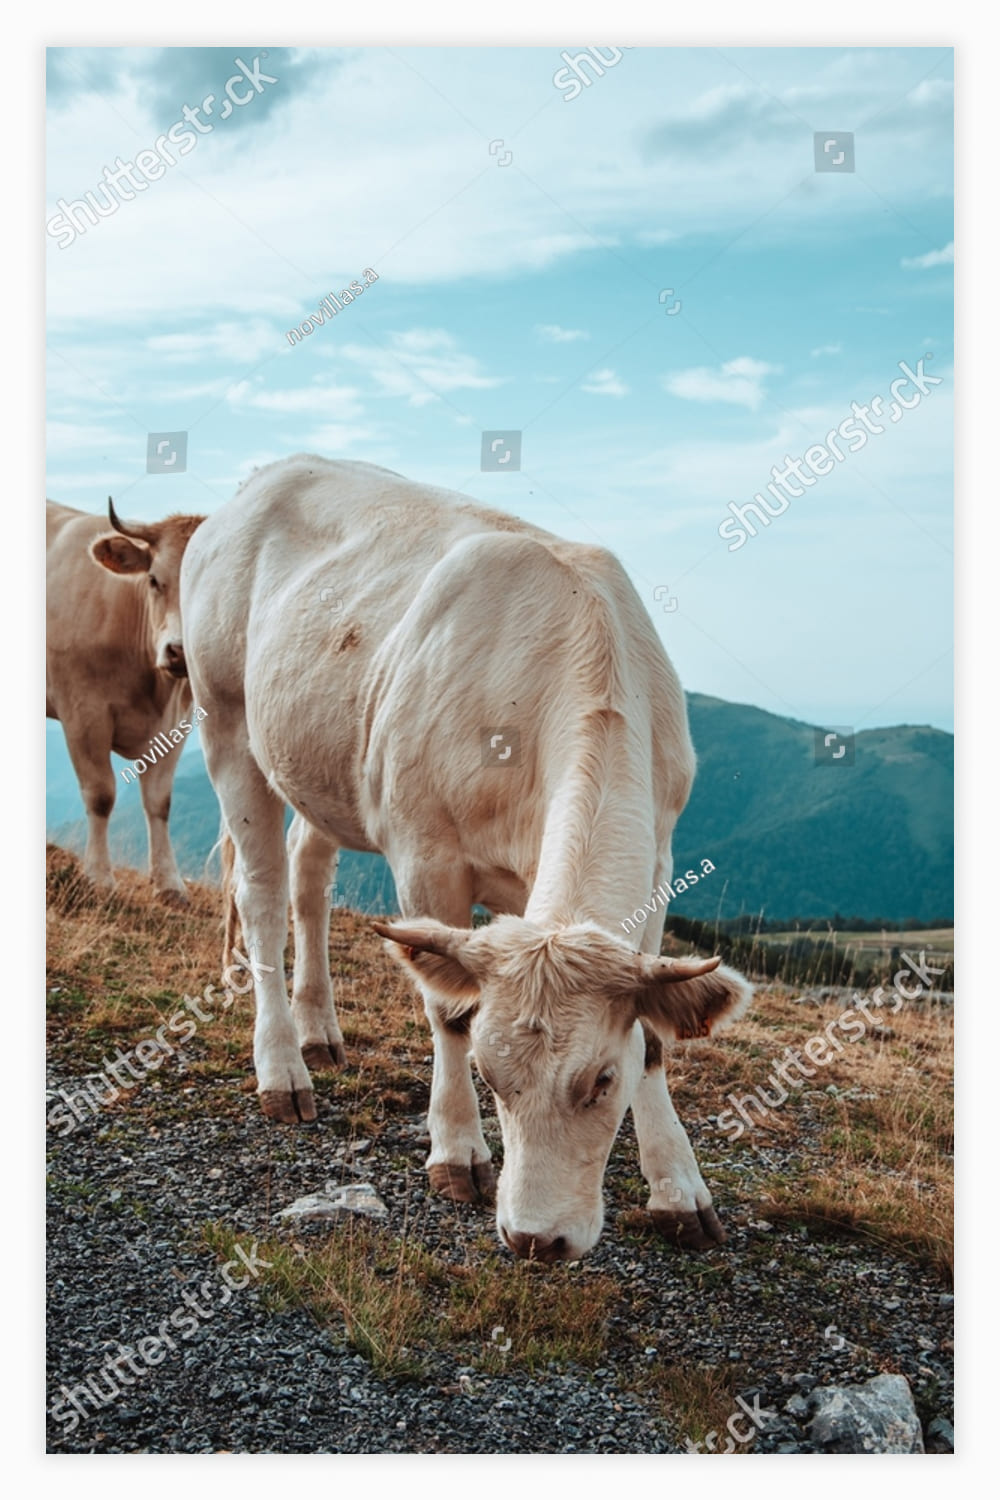 Two cows grazing on the side of a hill.